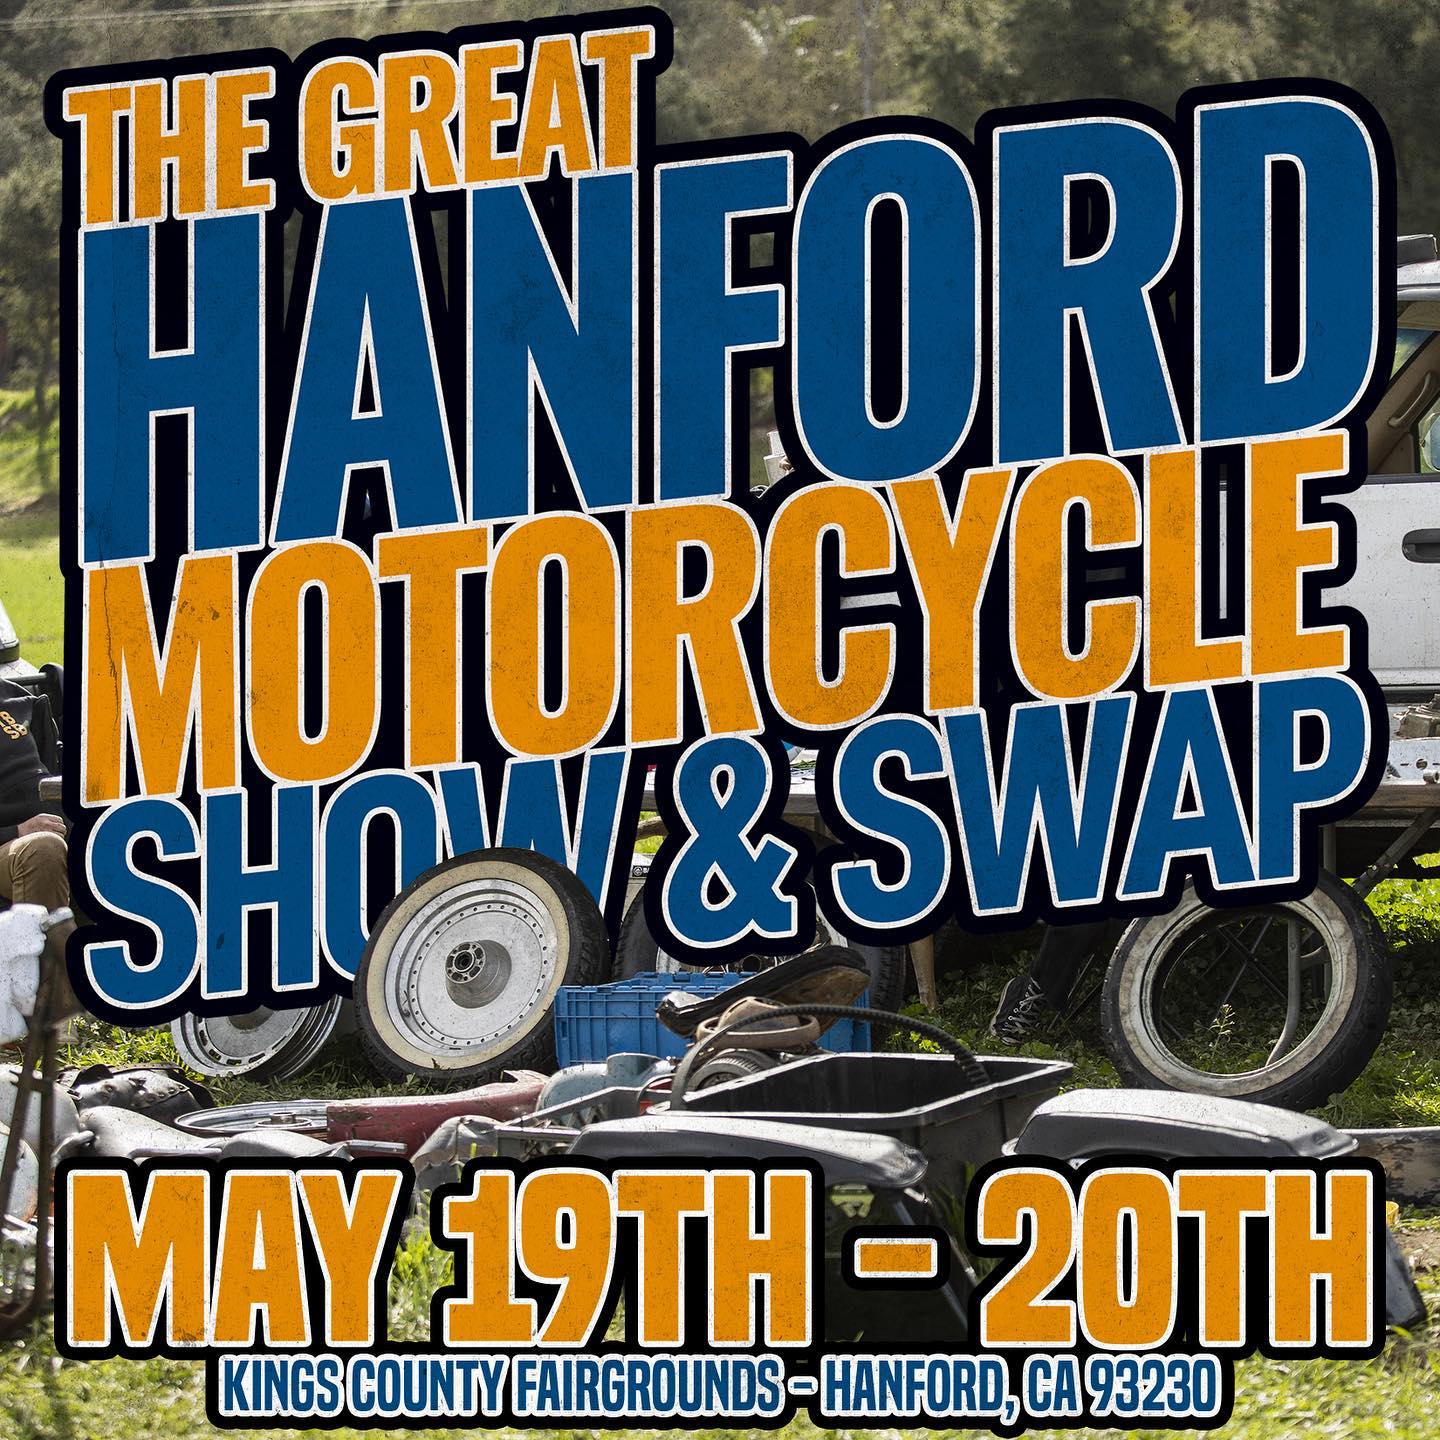 Great Hanford Motorcycle Show & Swap